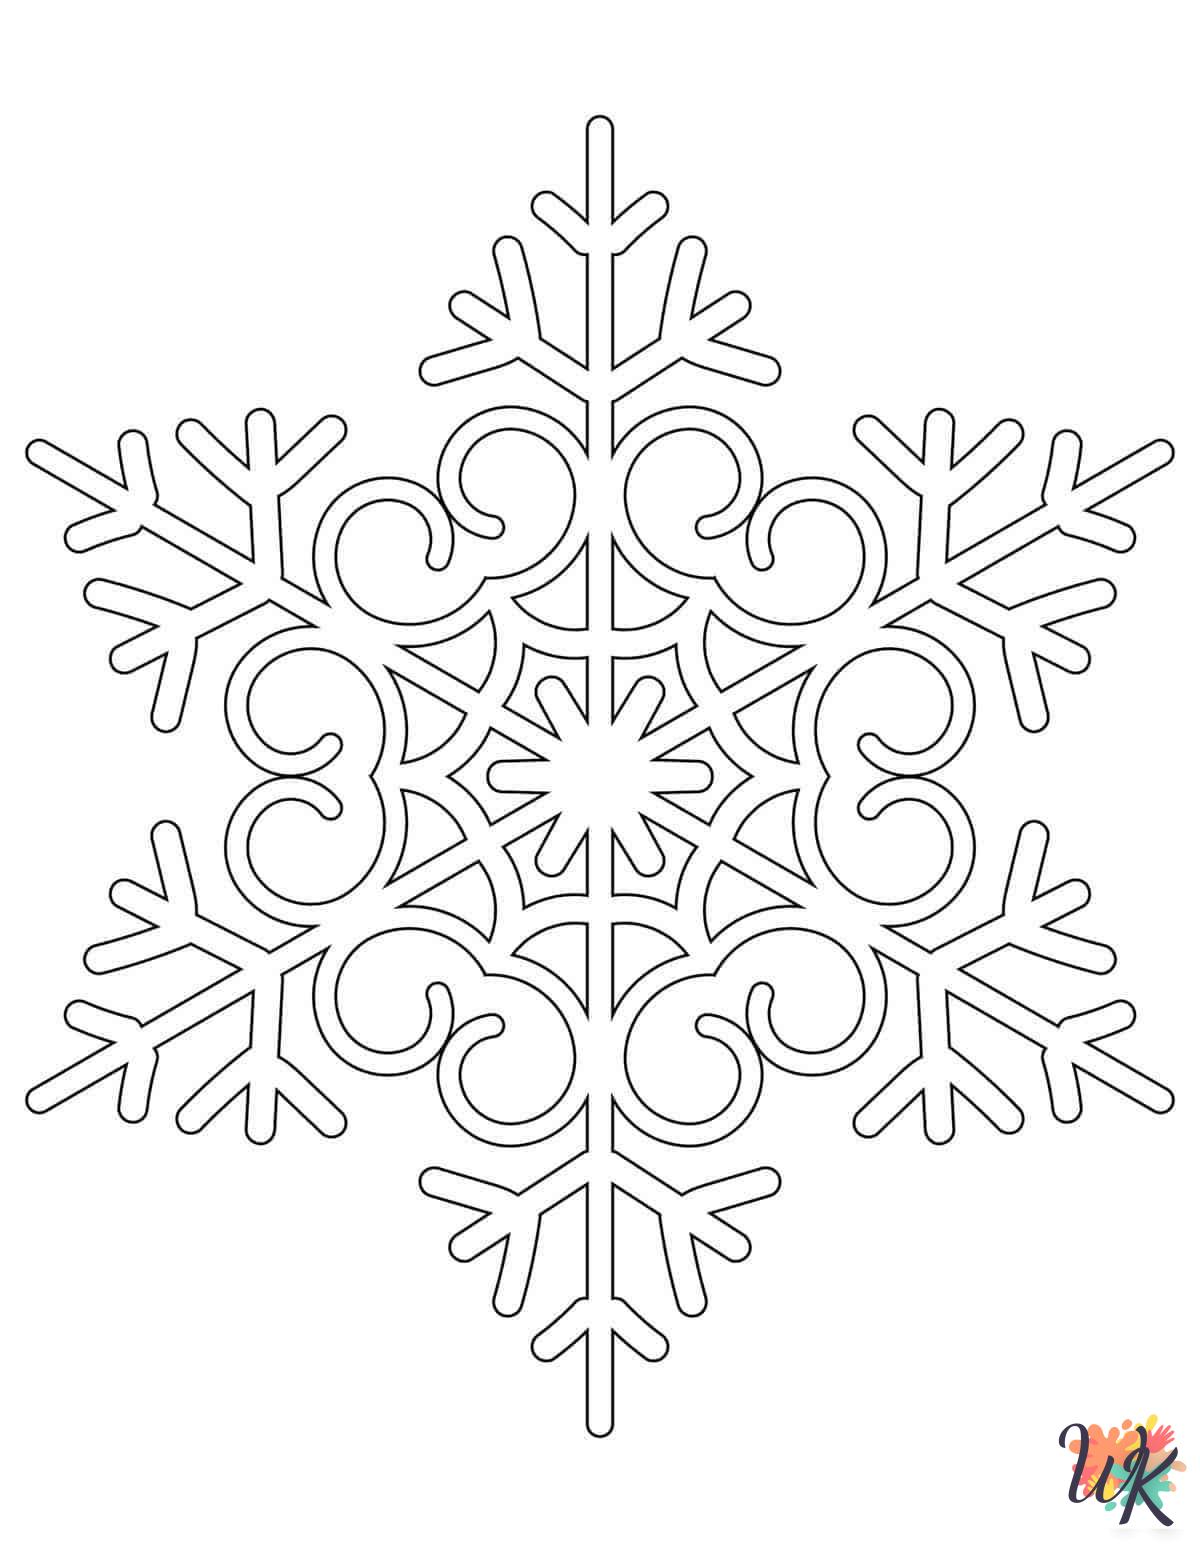 easy Winter coloring pages